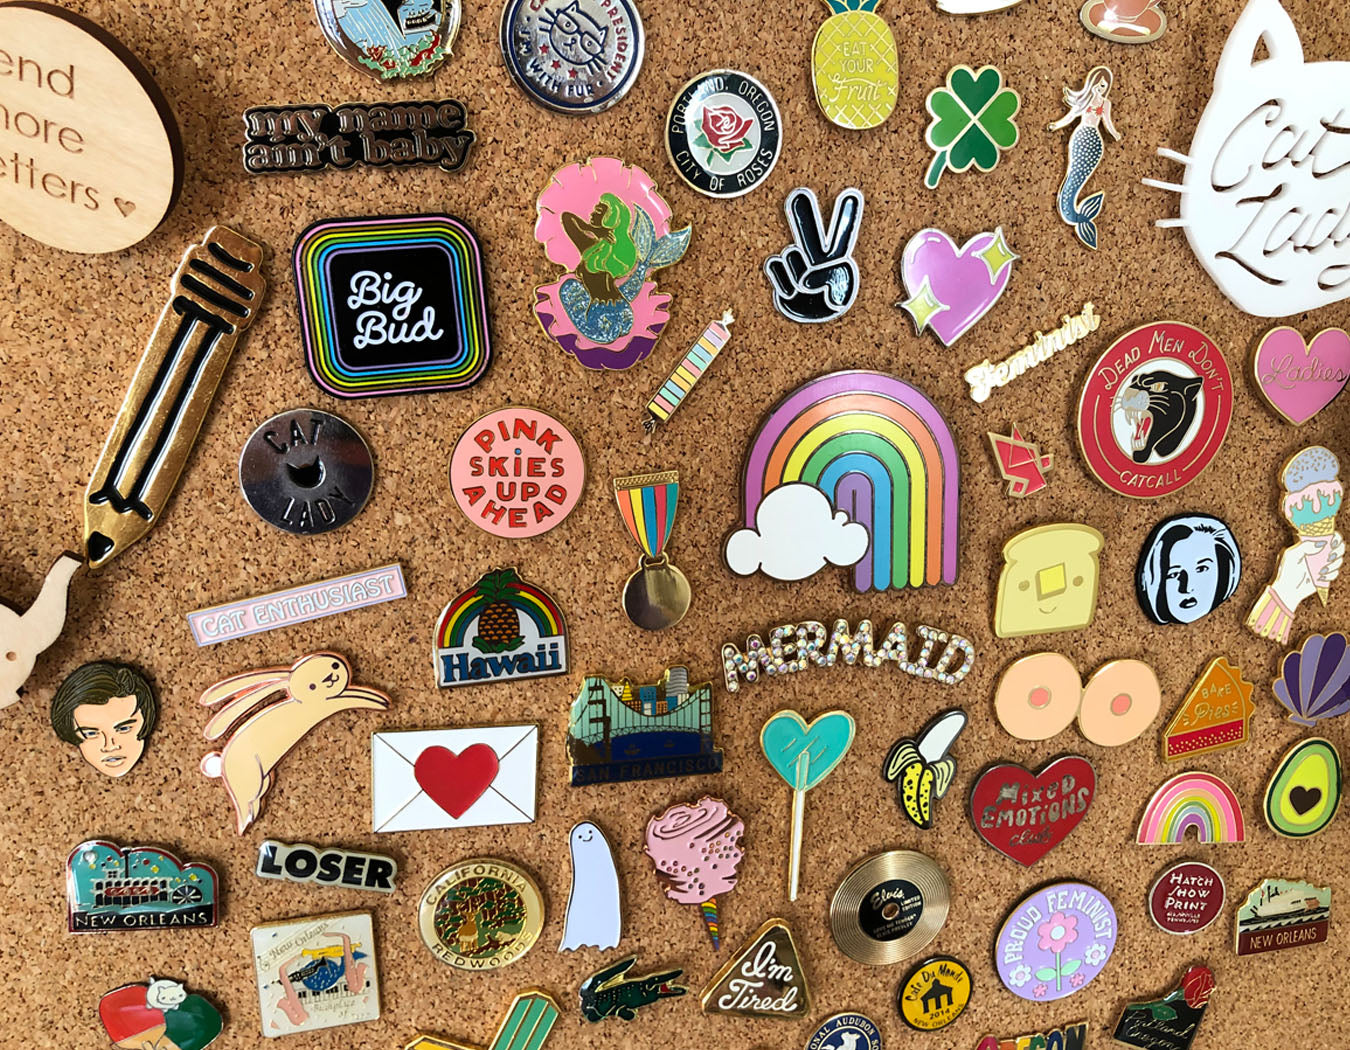 🎸Punks Not Dead🎸 — any ideas for what to put on bottle cap pins?